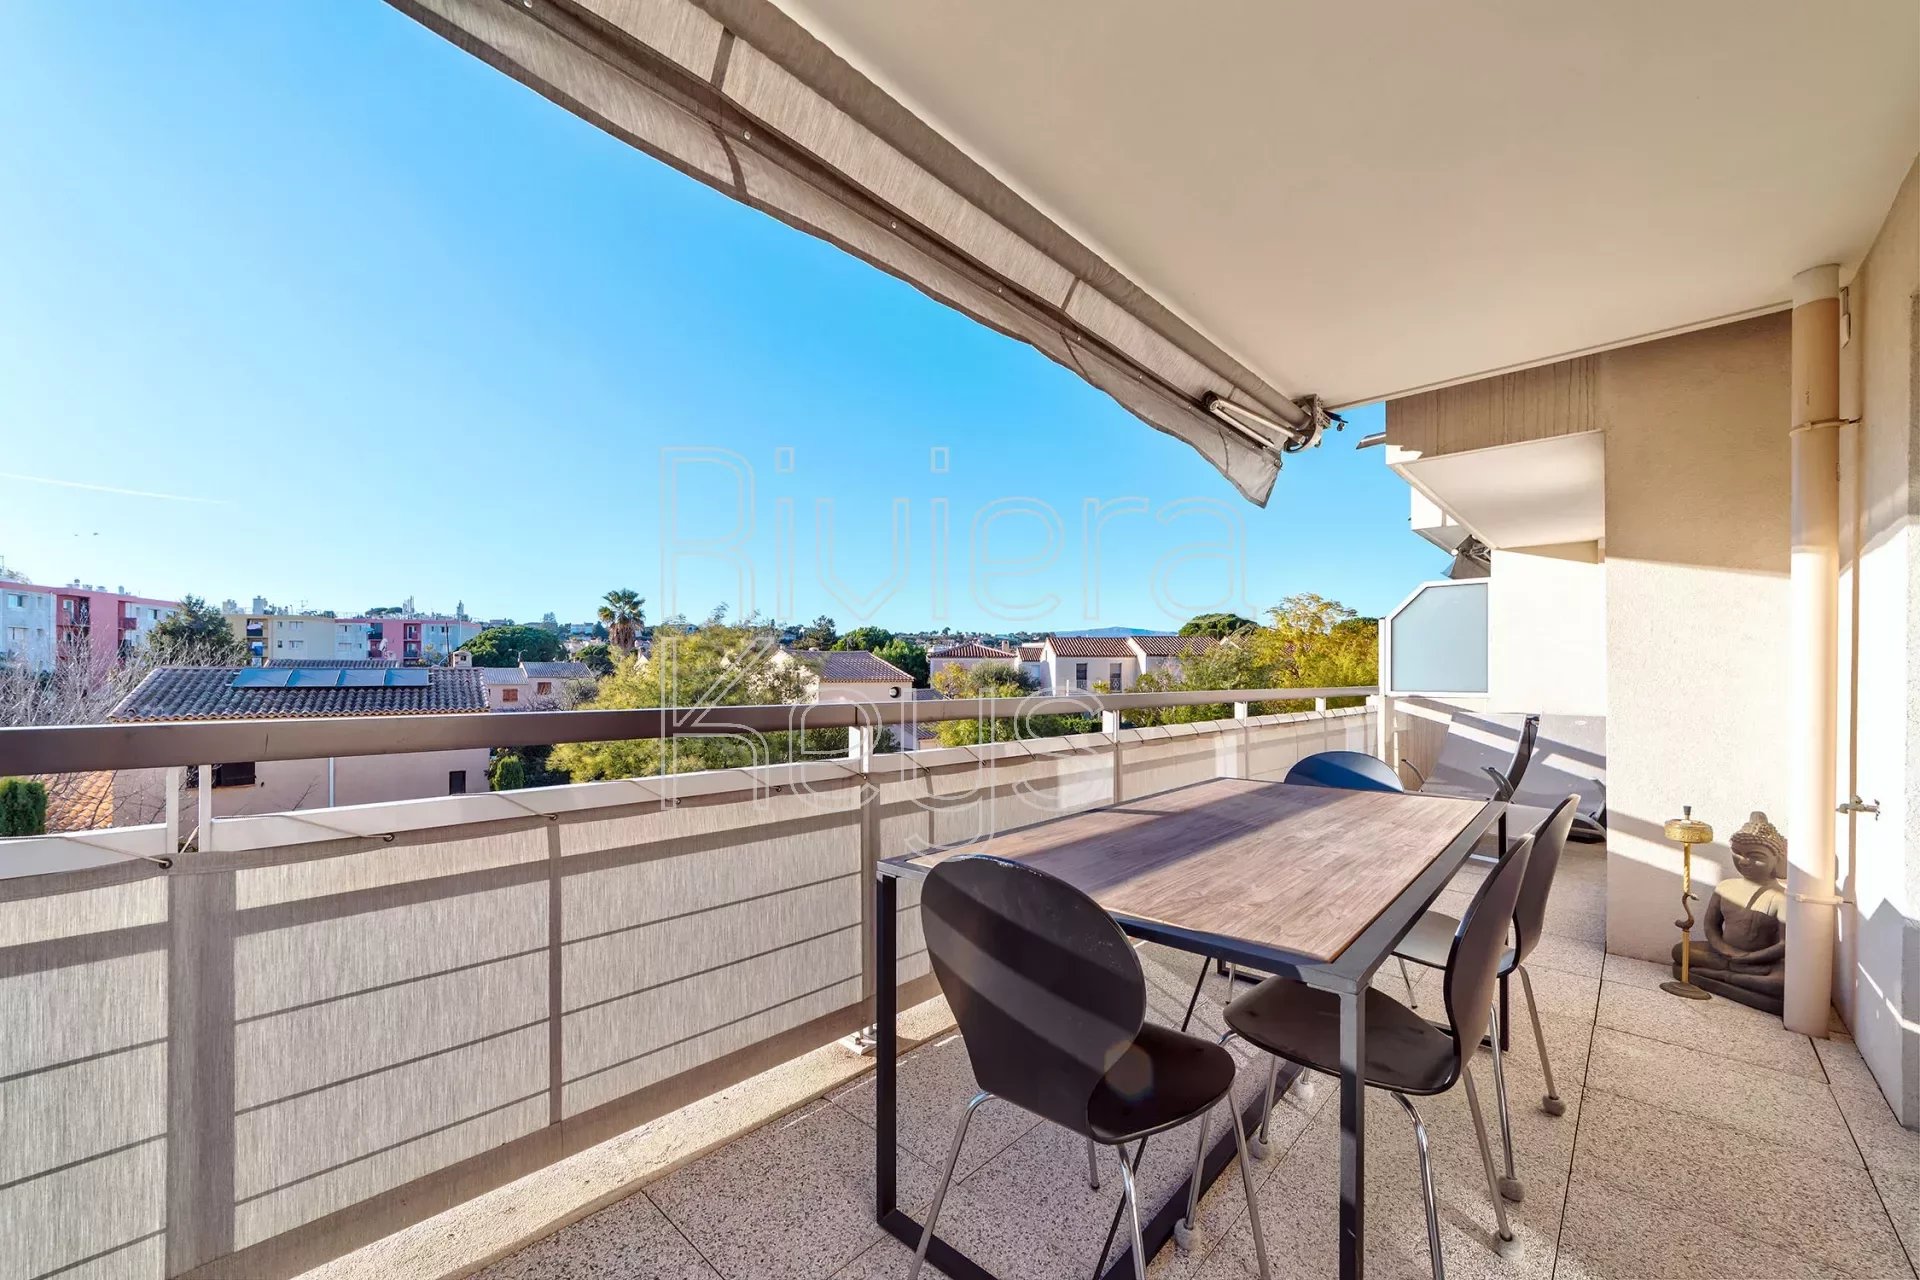 Turnkey impeccable 2 bedroom apartment, 28 m2 terrace, Antibes